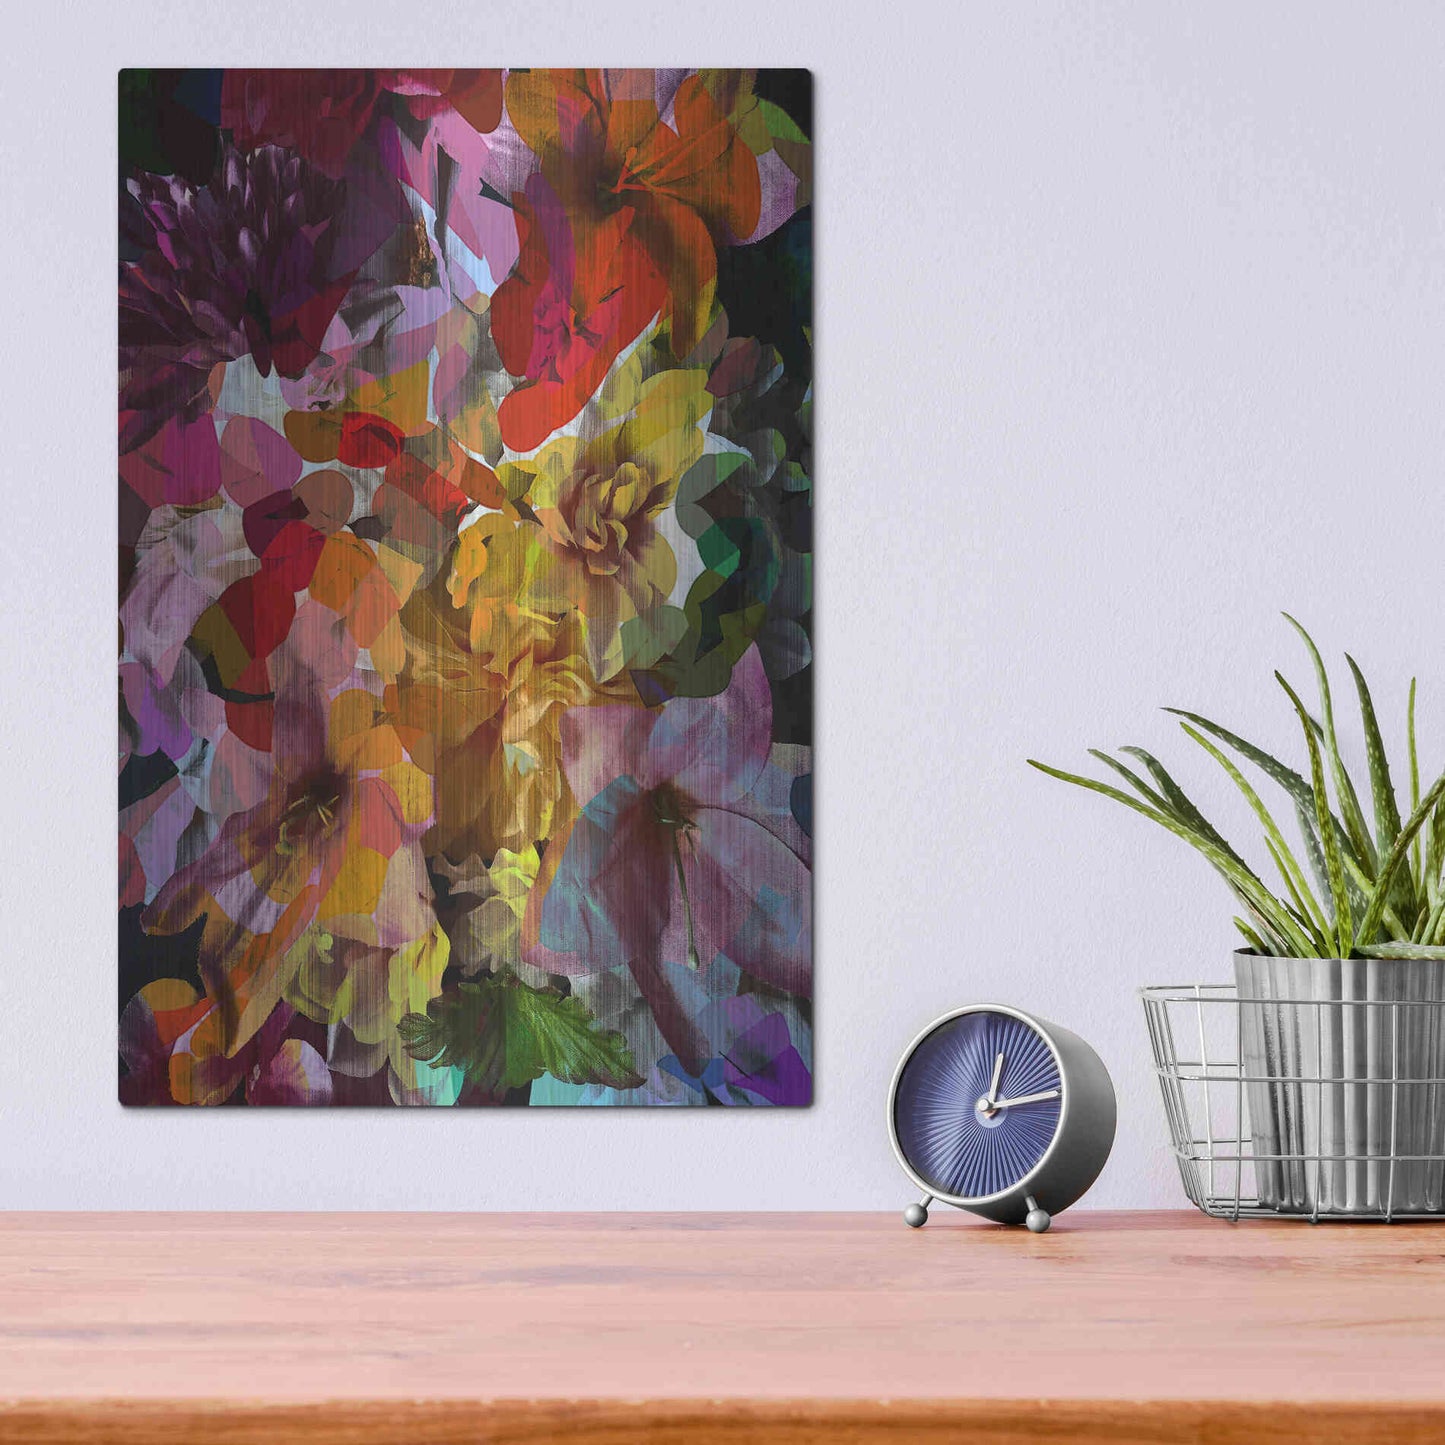 Luxe Metal Art 'Abstract Floral' by Shandra Smith, Metal Wall Art,12x16